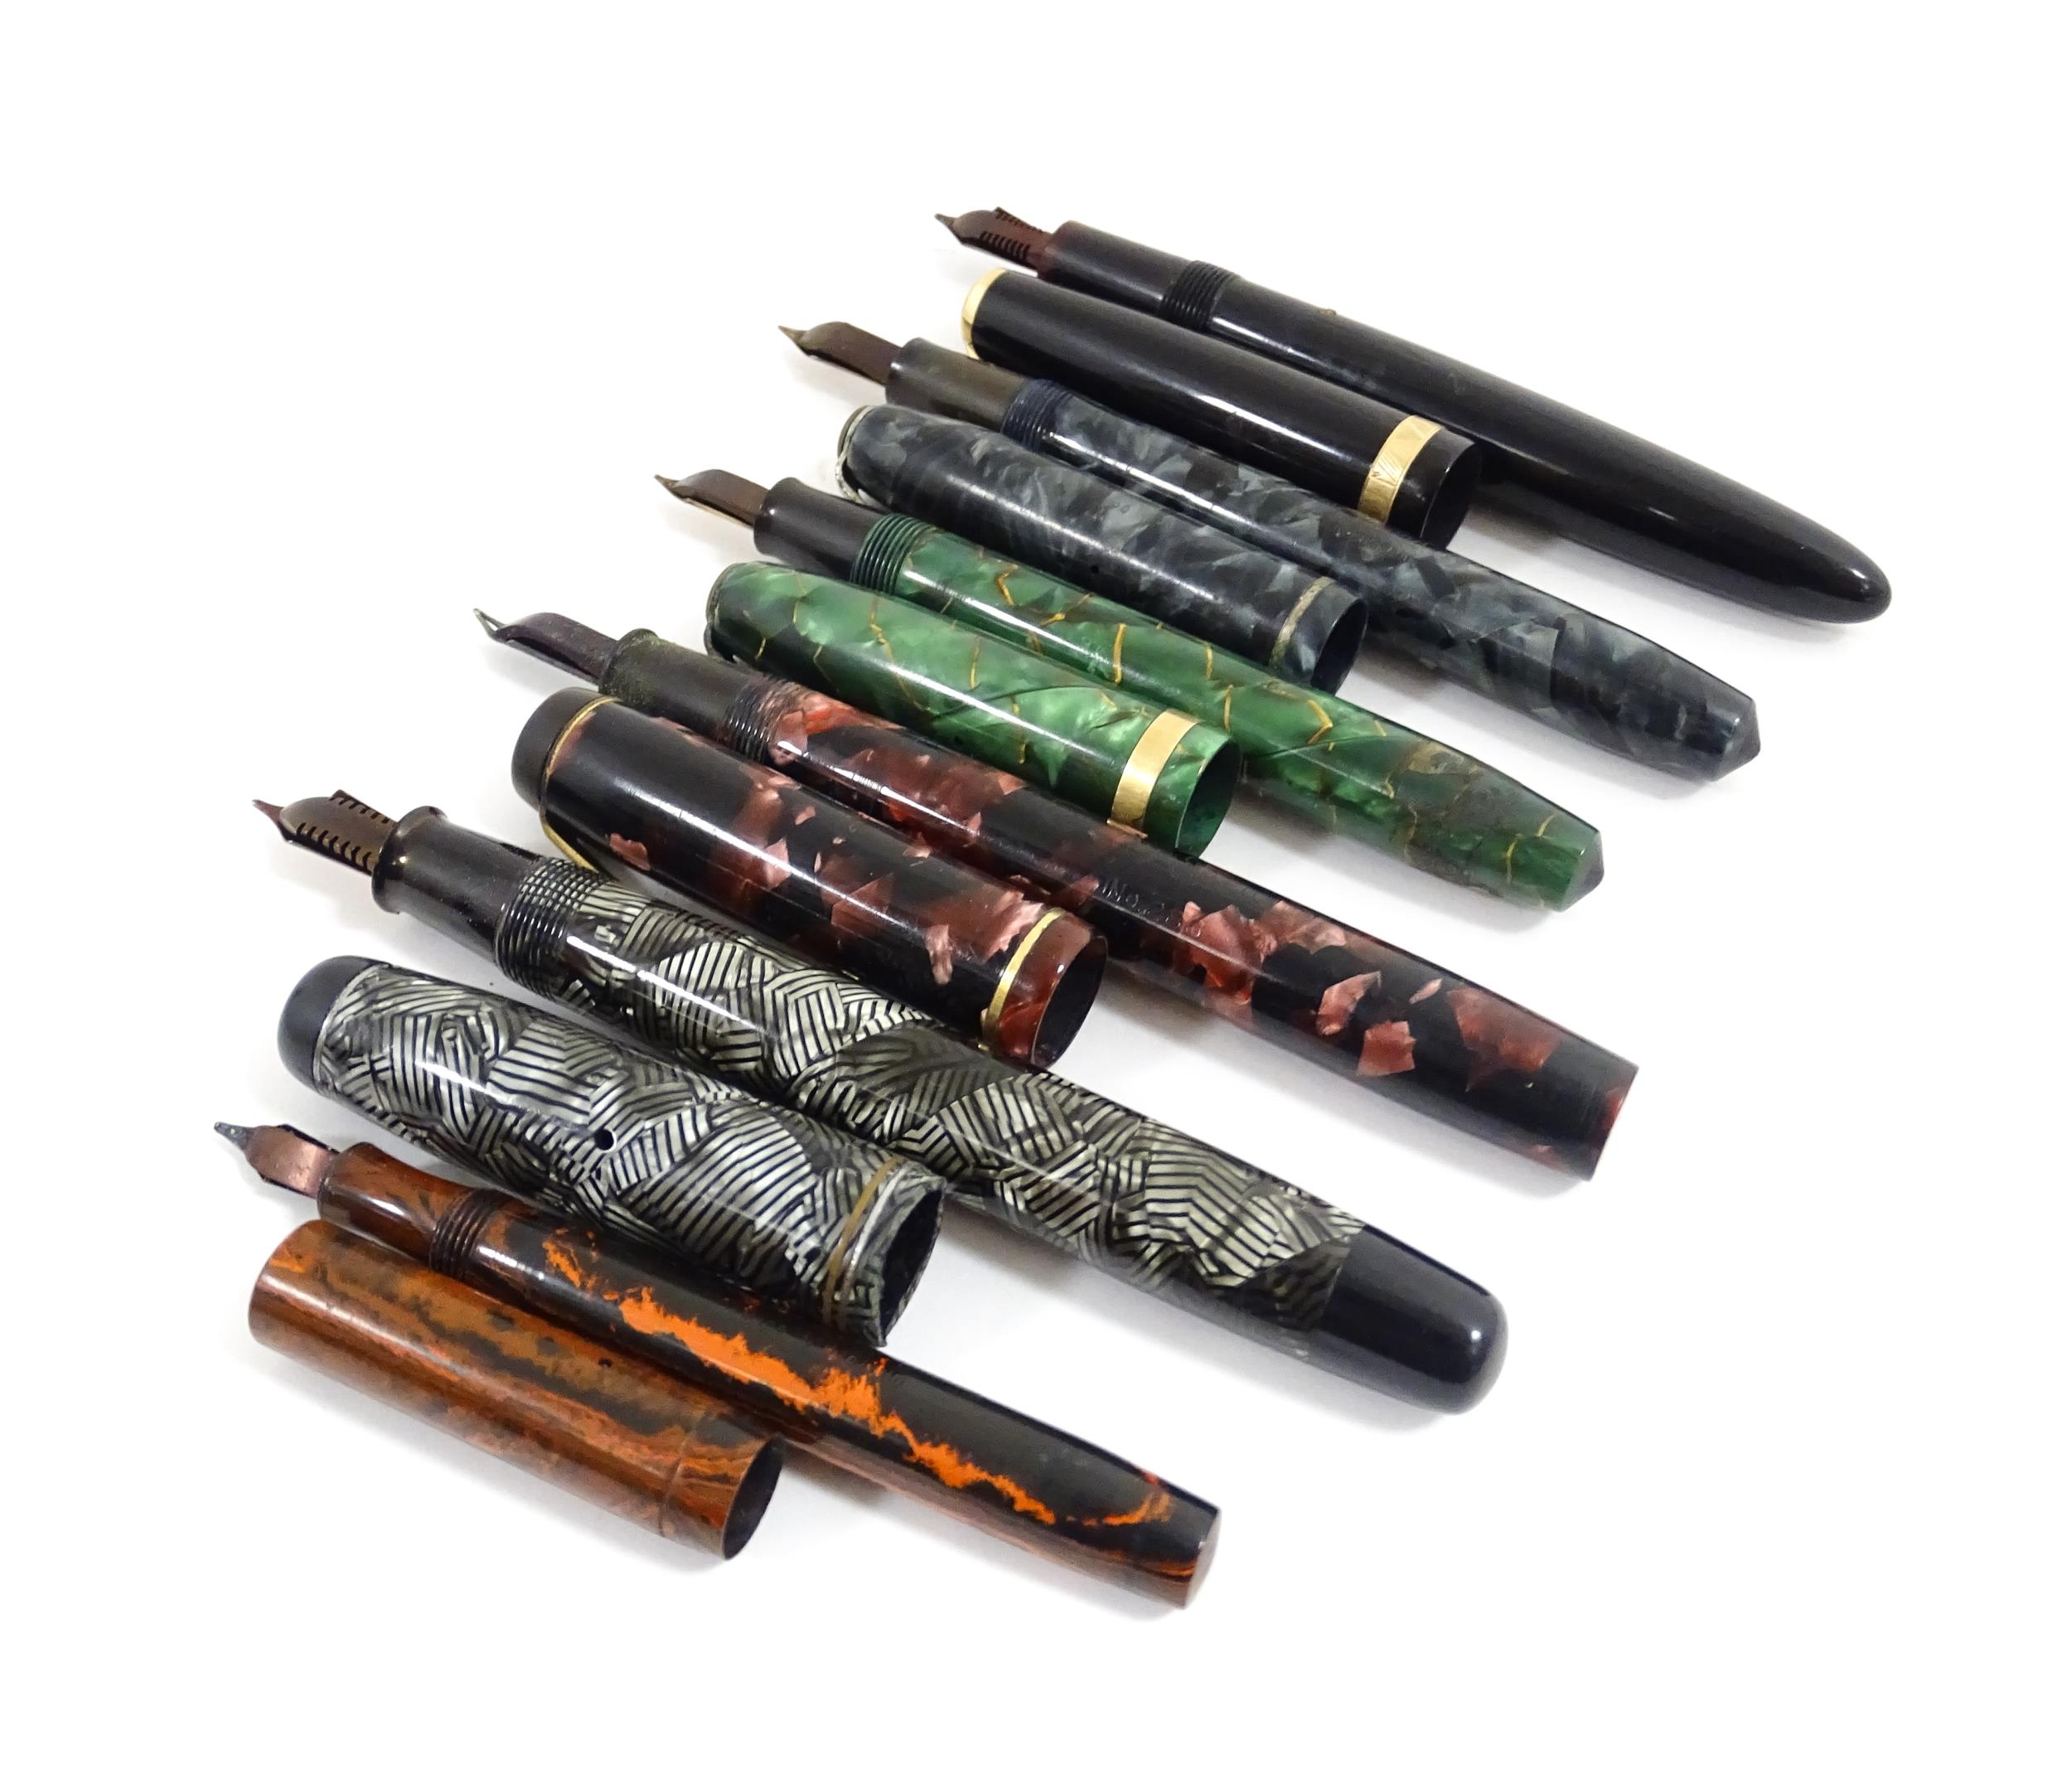 Six fountain pens with 14ct nibs, to include a Parker 'Duofold' with black finish and 14kt gold nib, - Image 17 of 22